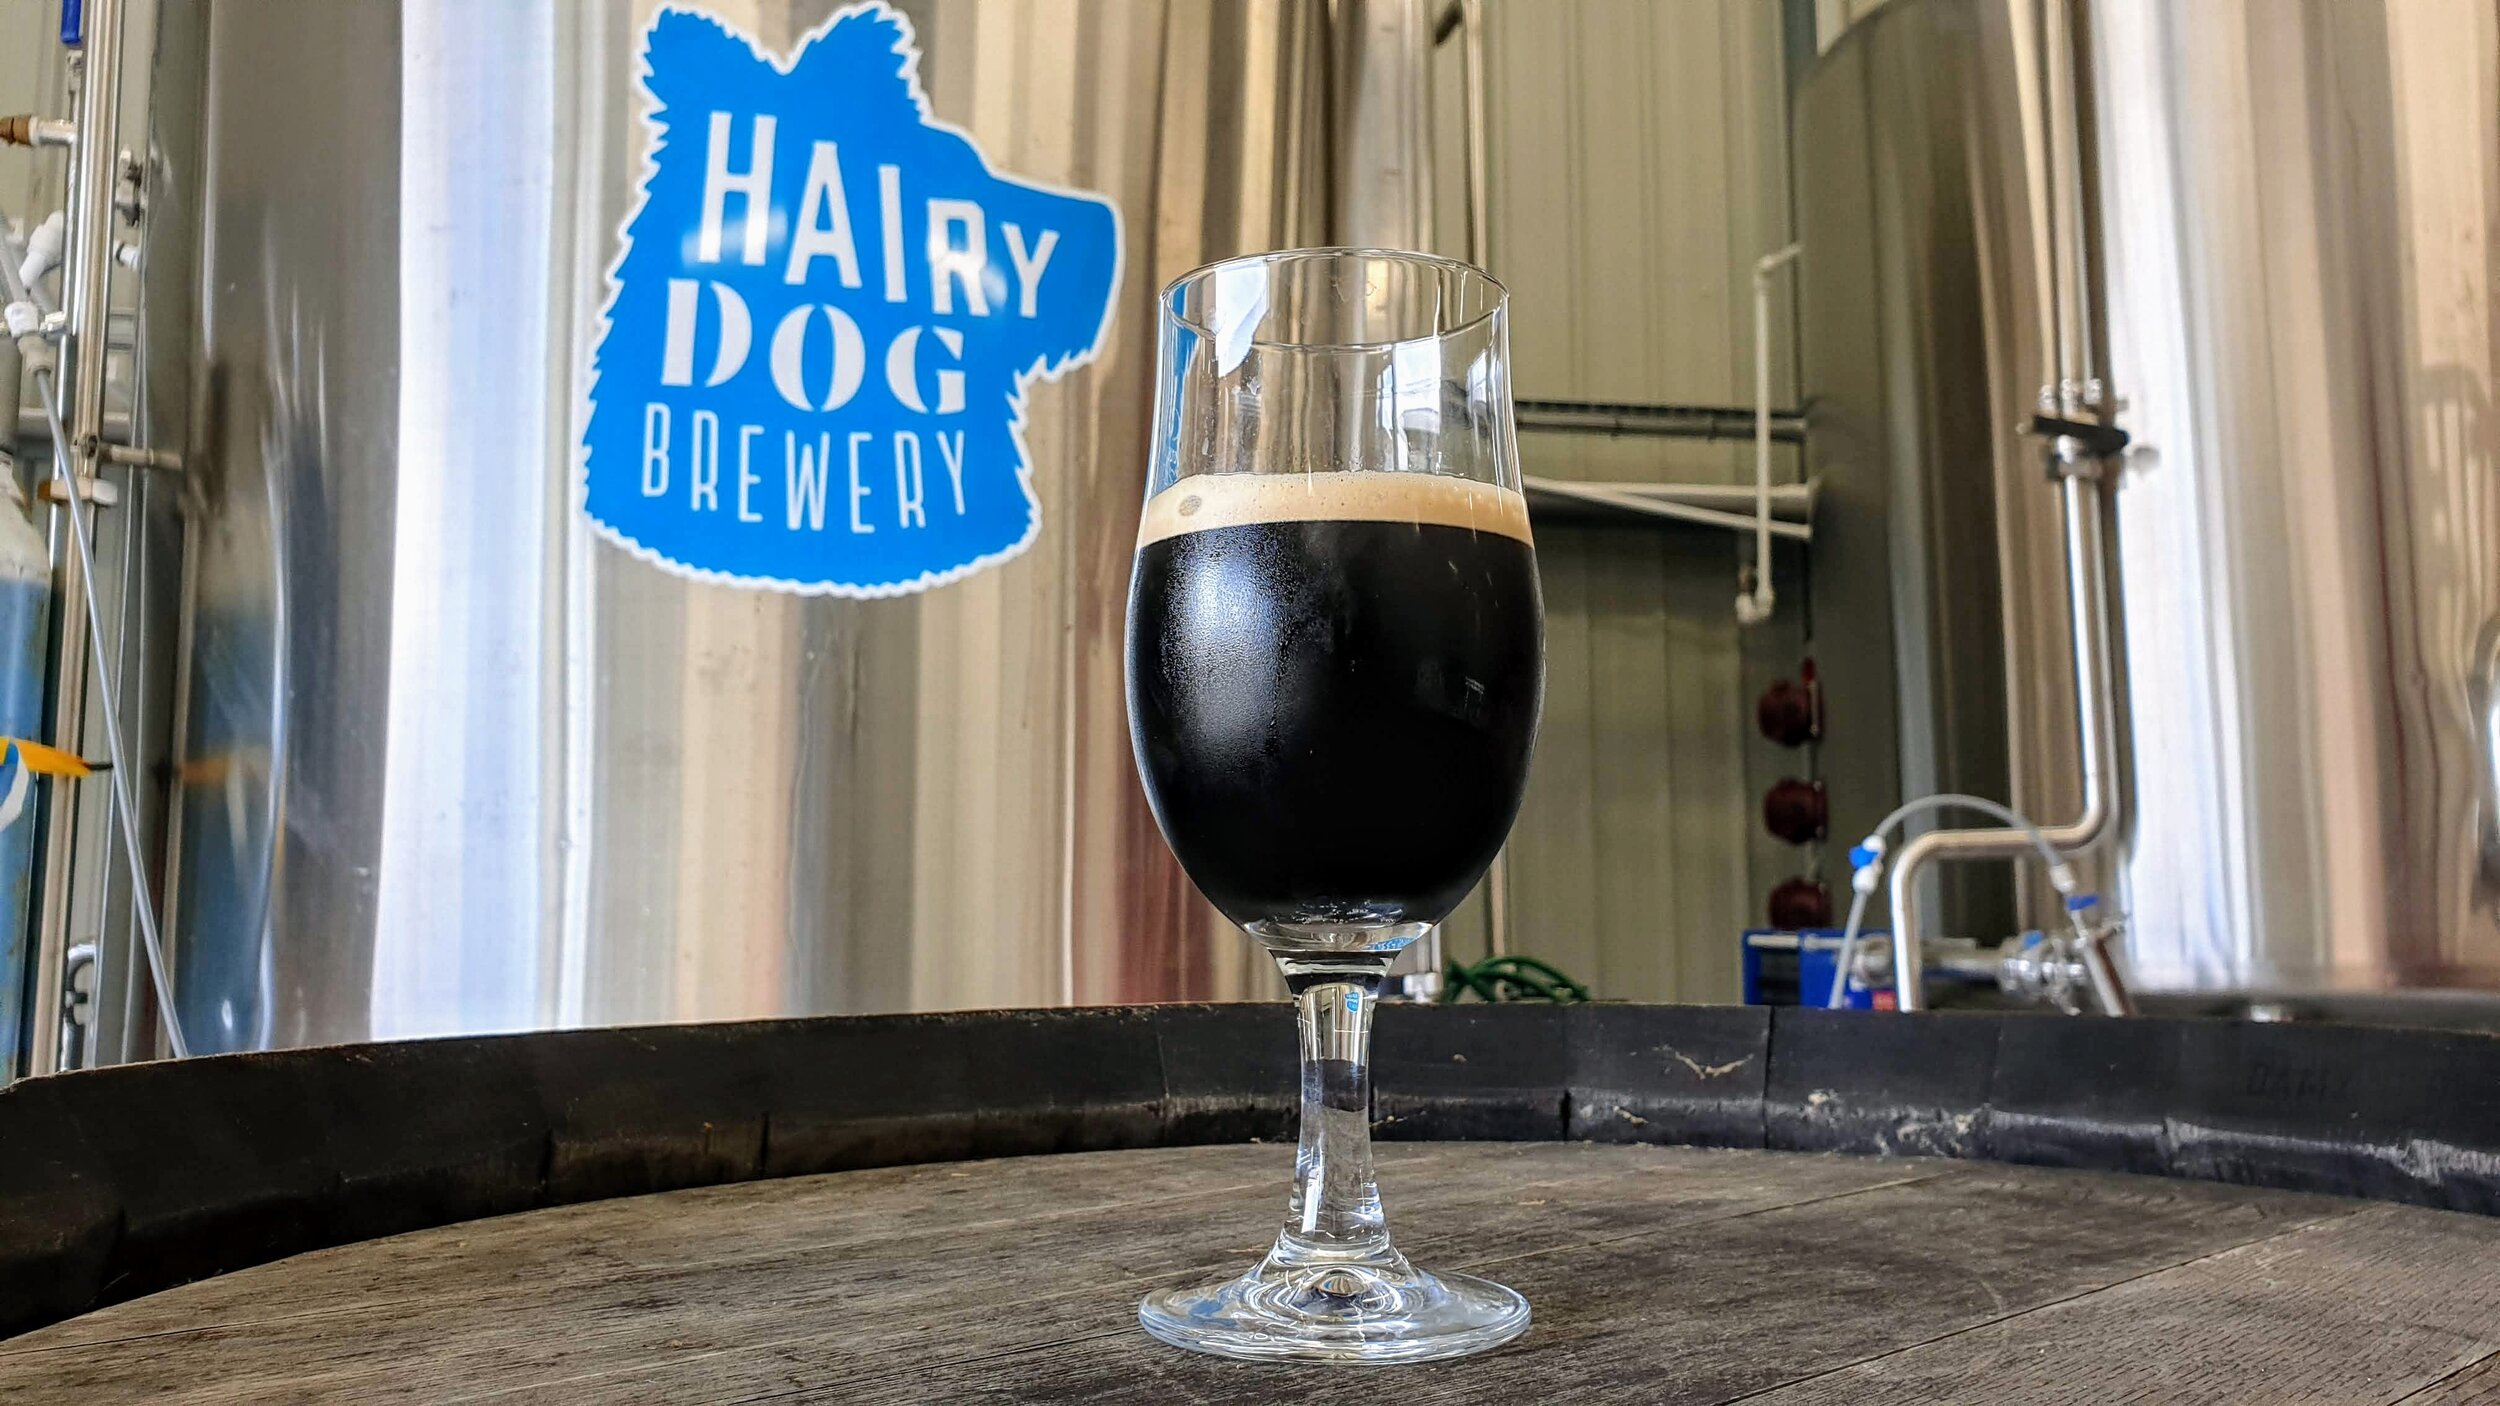 Hairy Dog brewery review from the owner of old black dog vineyard, an interview with the brewery from Sussex and an interview with Russ who is originally from Brick Brewery